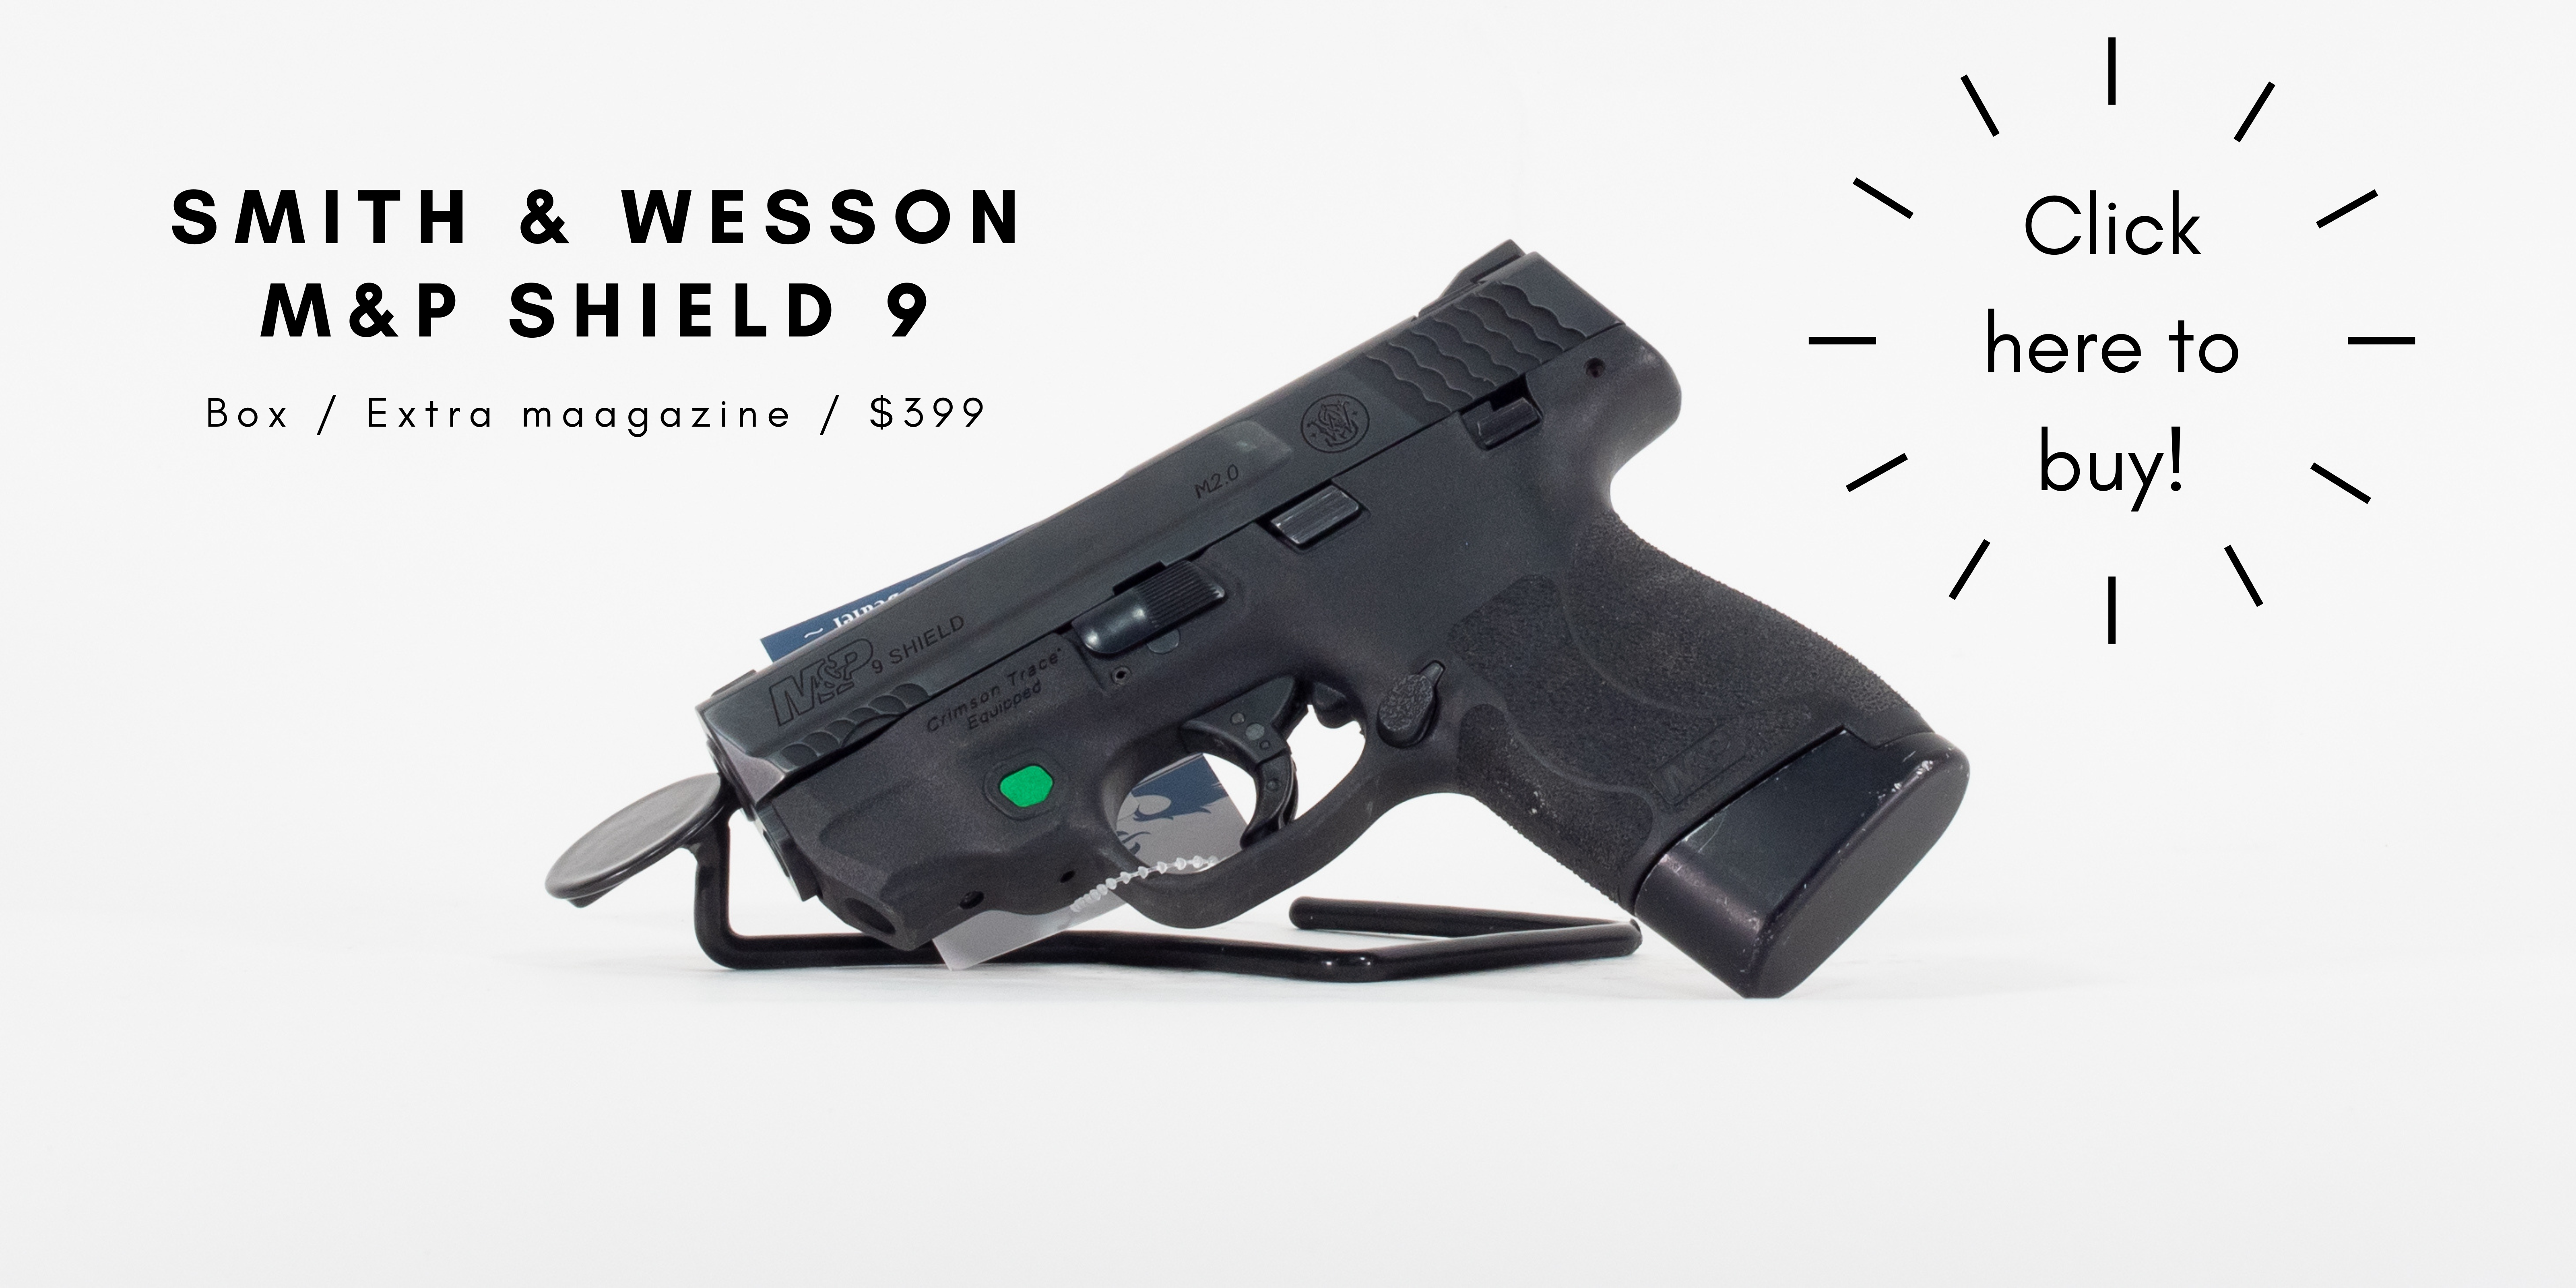 https://www.lancotactical.com/products/smith-wesson-11901-022188871630-11901-2957